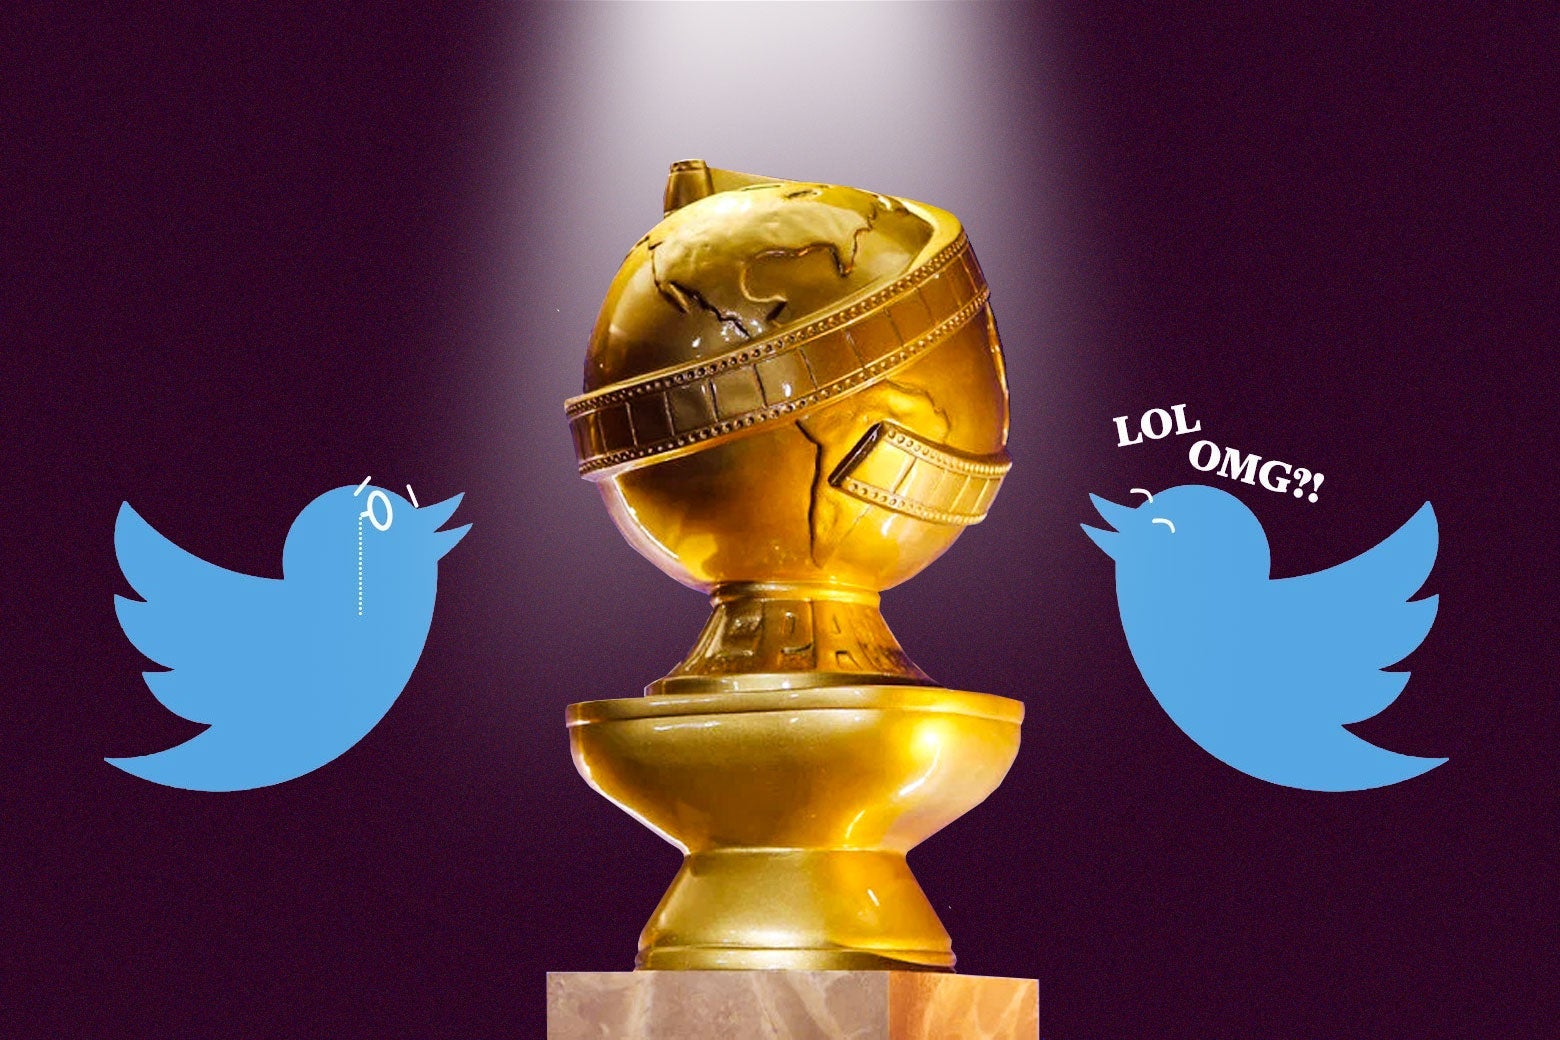 Two Twitter birds, one with a monocle and the other saying LOL and OMG, surrounding a Golden Globe trophy.